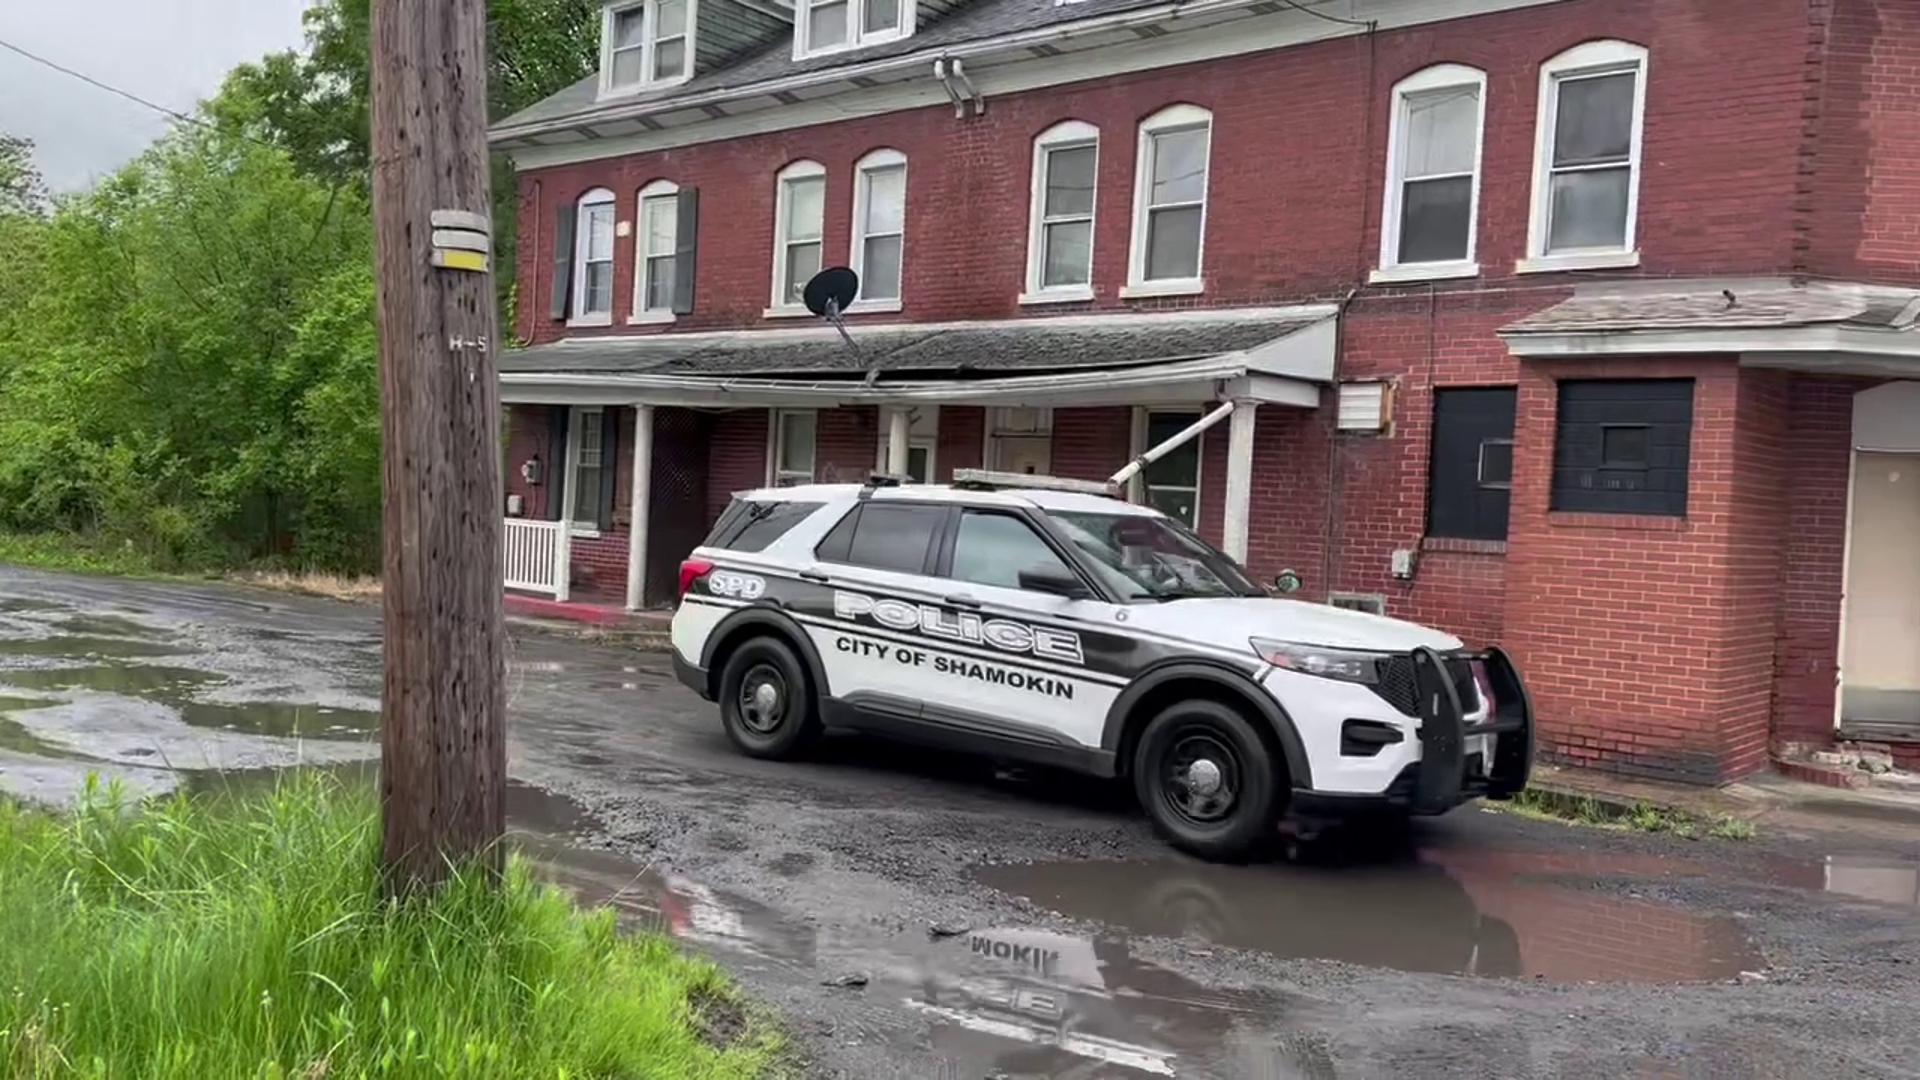 Officers responded to the area of Harrison Street in Shamokin around 3 p.m. Tuesday.